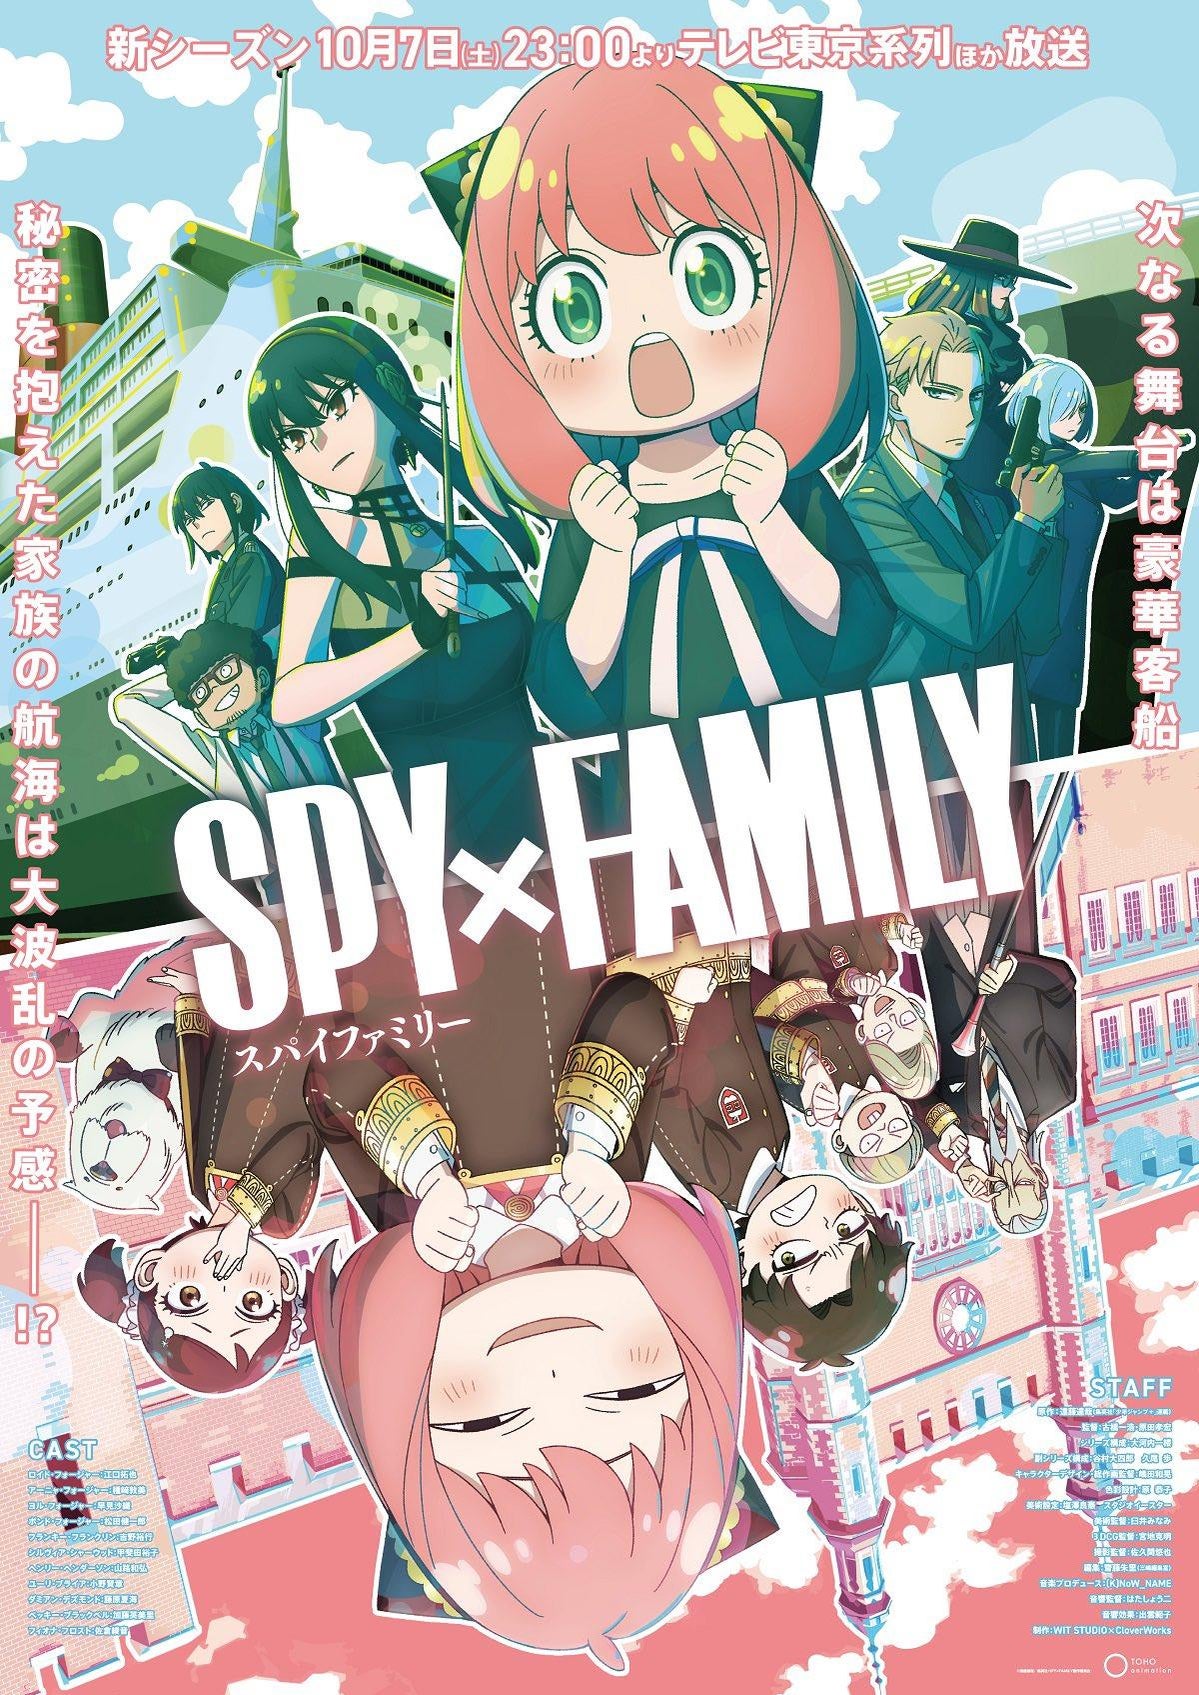 Spy x Family' Season 2 Episode 3:- When, where to watch and what to expect  from Manga series